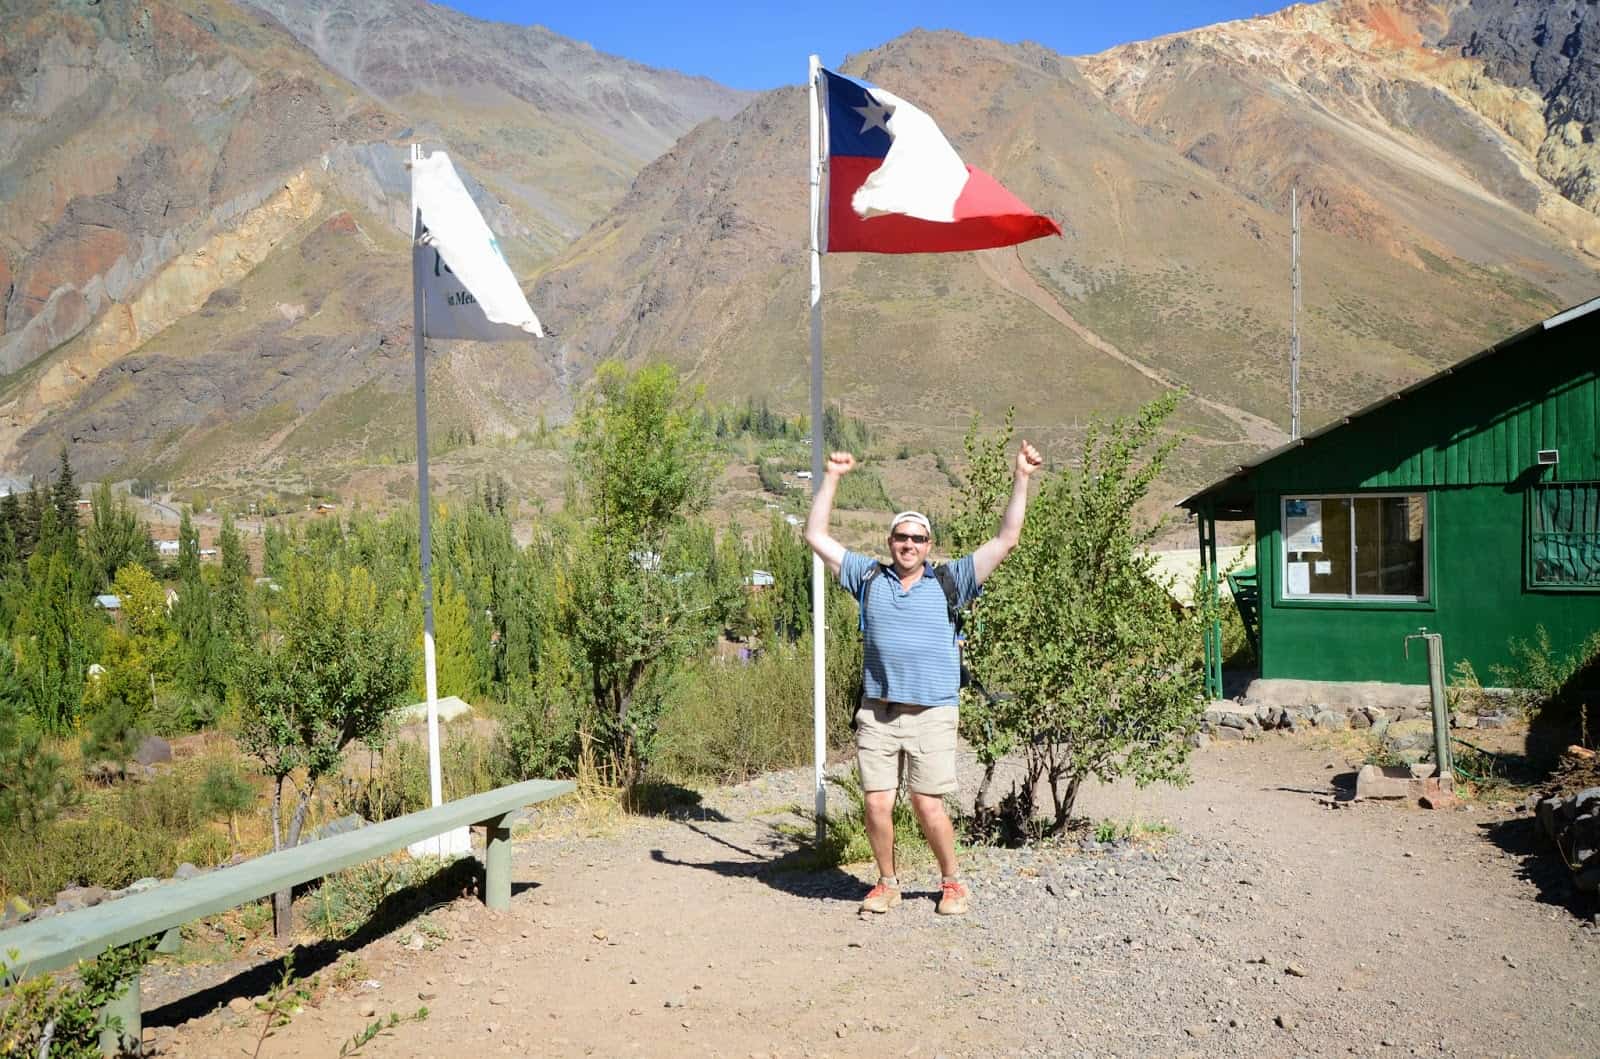 Mike celebrating at the end of the hike at El Morado, Cajón del Maipo, Chile